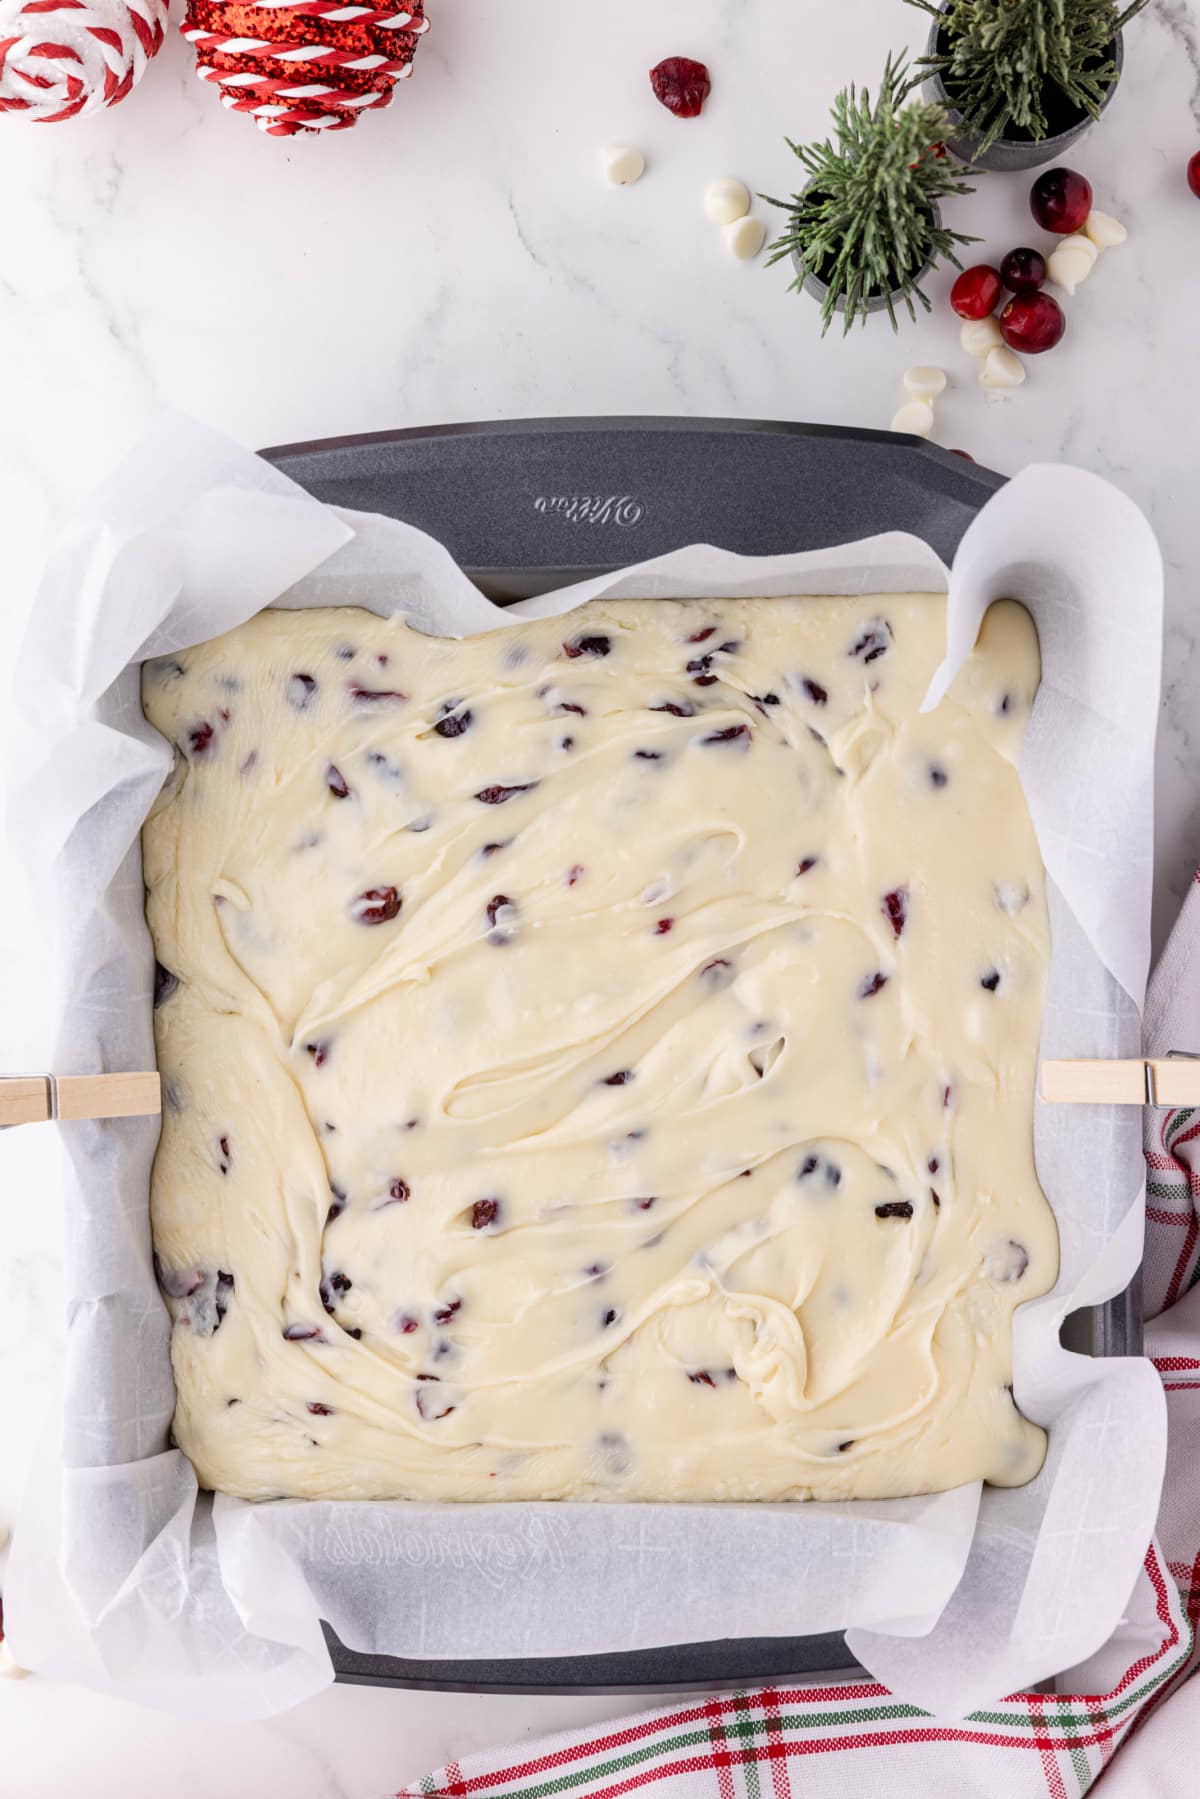 white chocolate fudge setting up in a baking pan with parchment paper